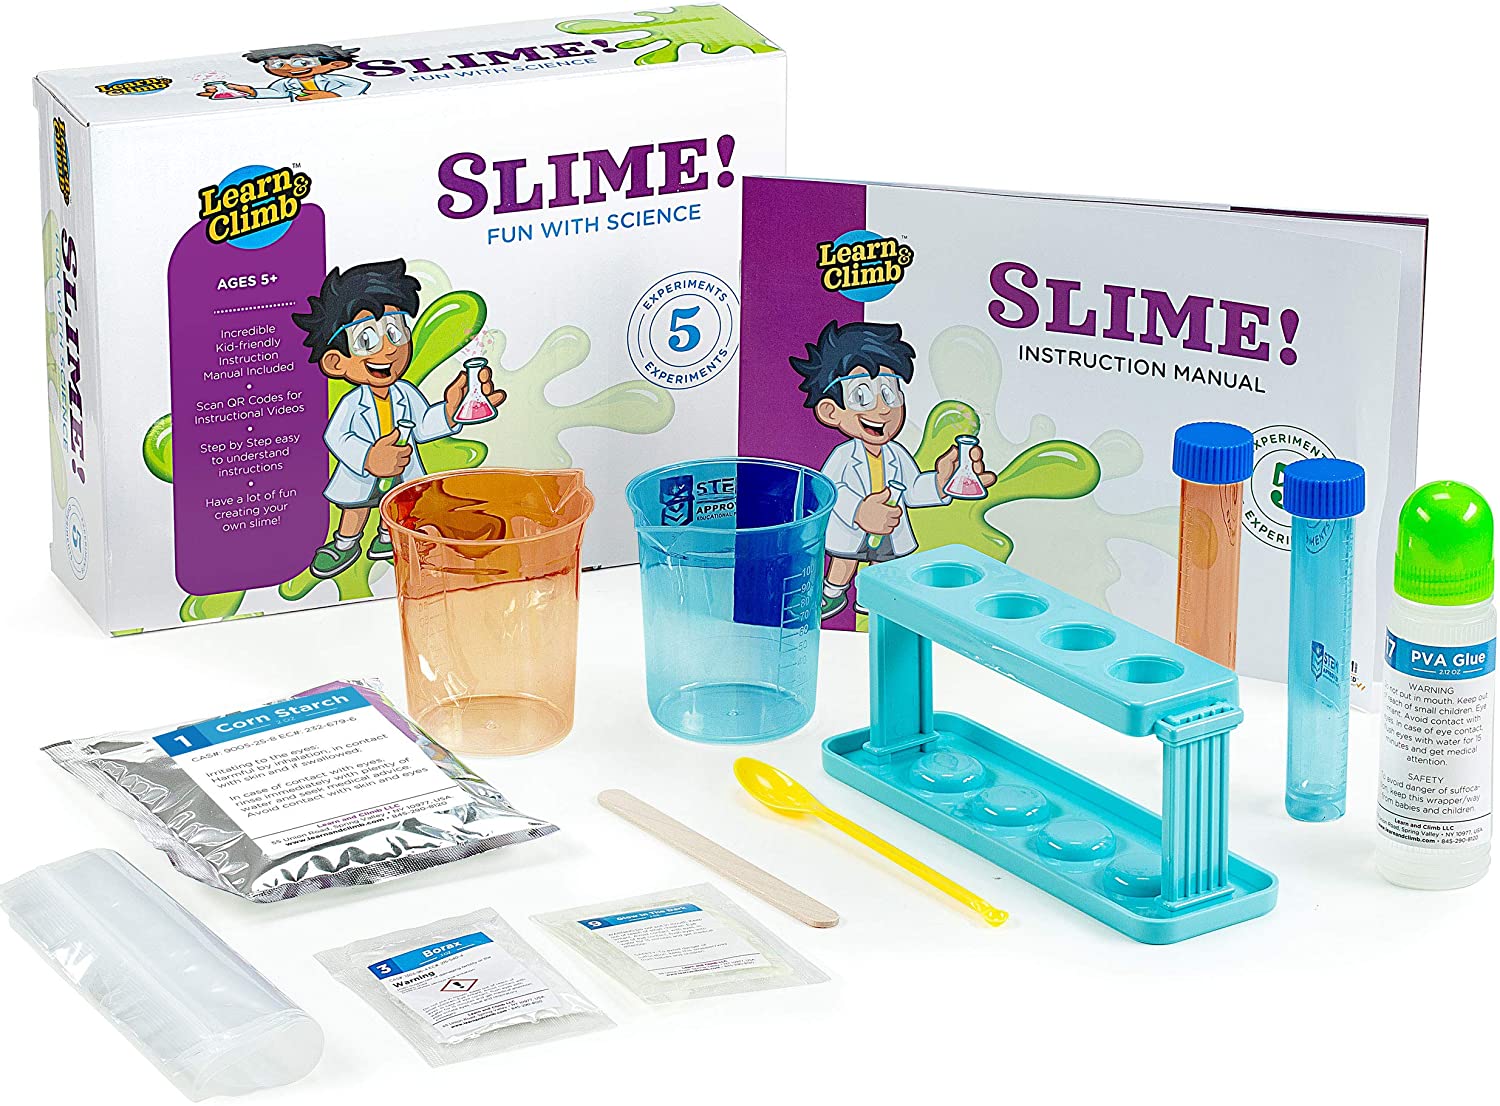 Chemistry Set for Kids 5-10 - Science Slime Lab kit with 6 Experiments. Step-by-Step Instruction Manual